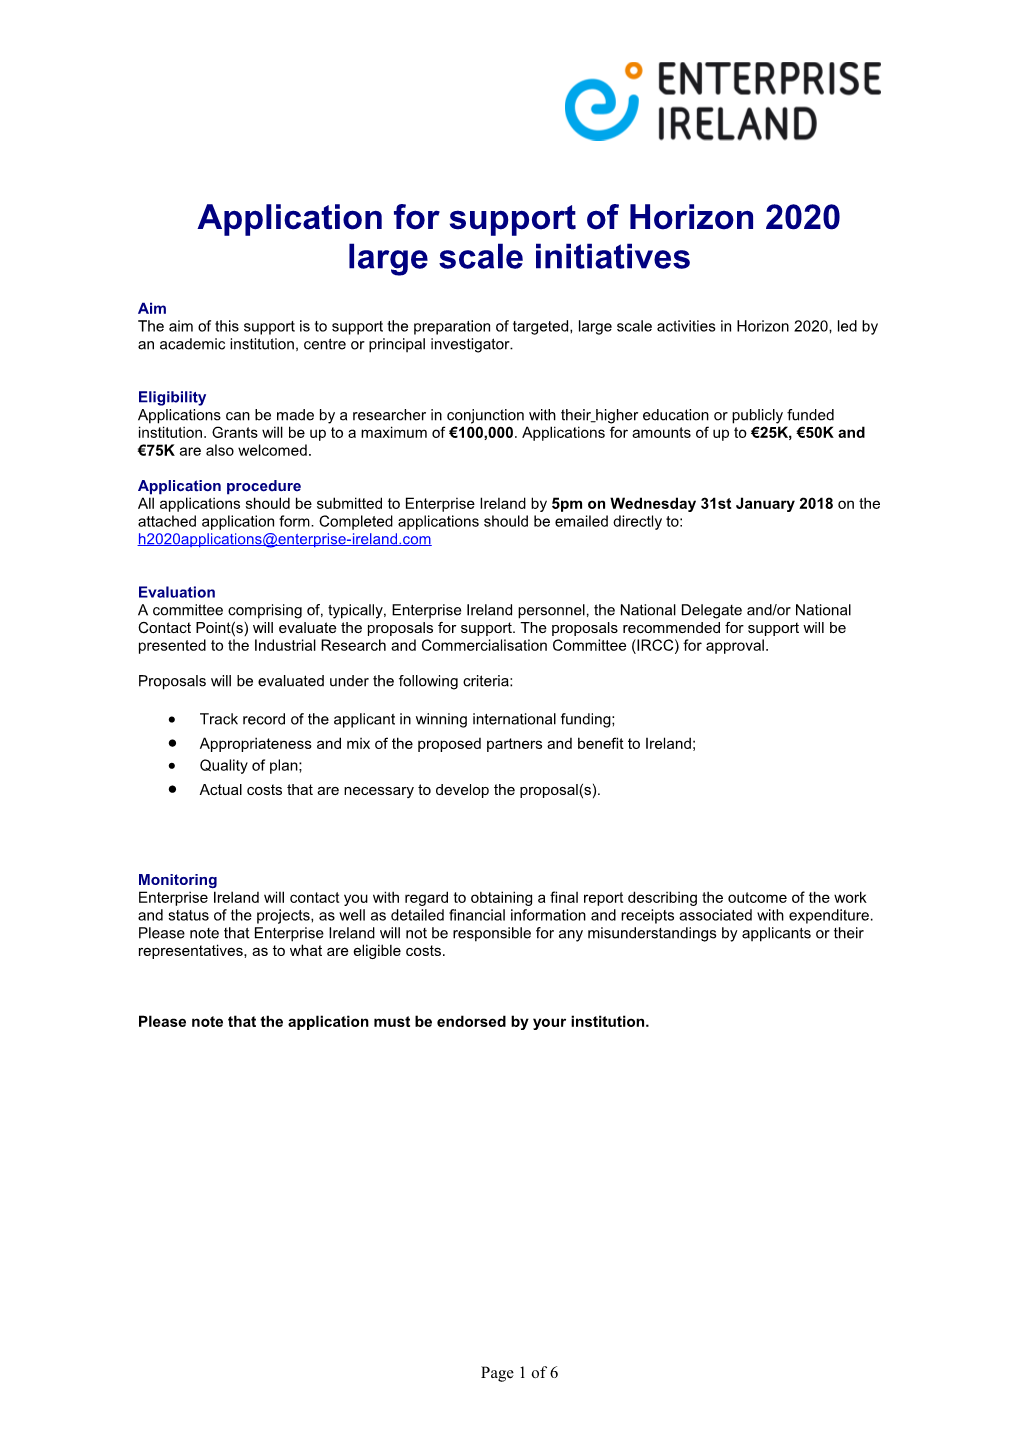 Application for Support of Horizon 2020 Large Scale Initiatives